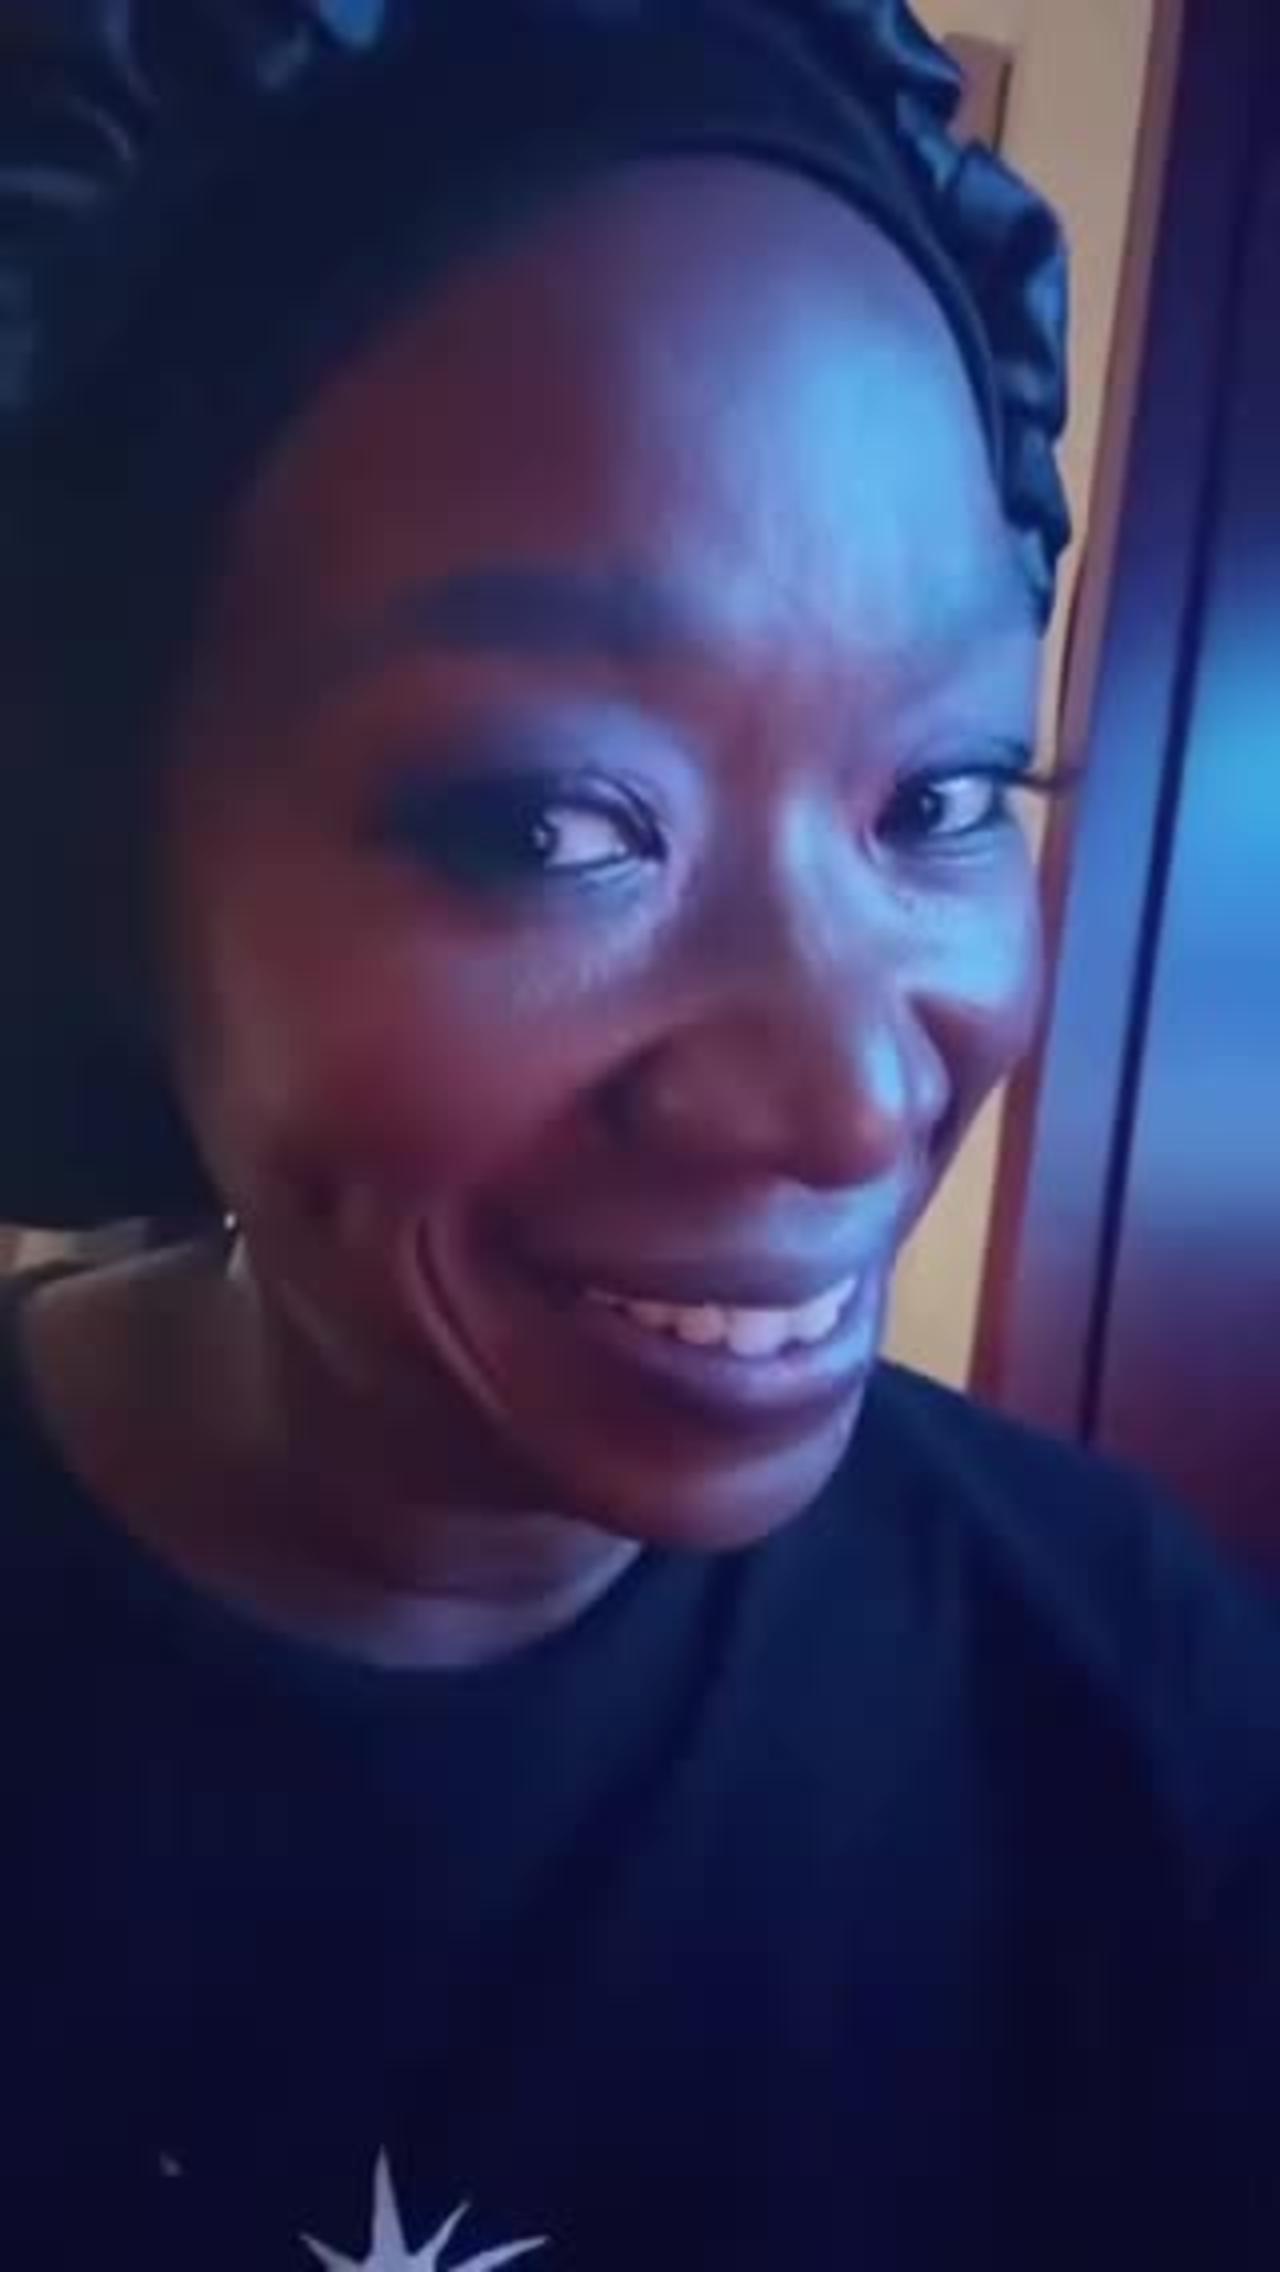 Joy Reid records her own mental breakdown and posts it on the internet